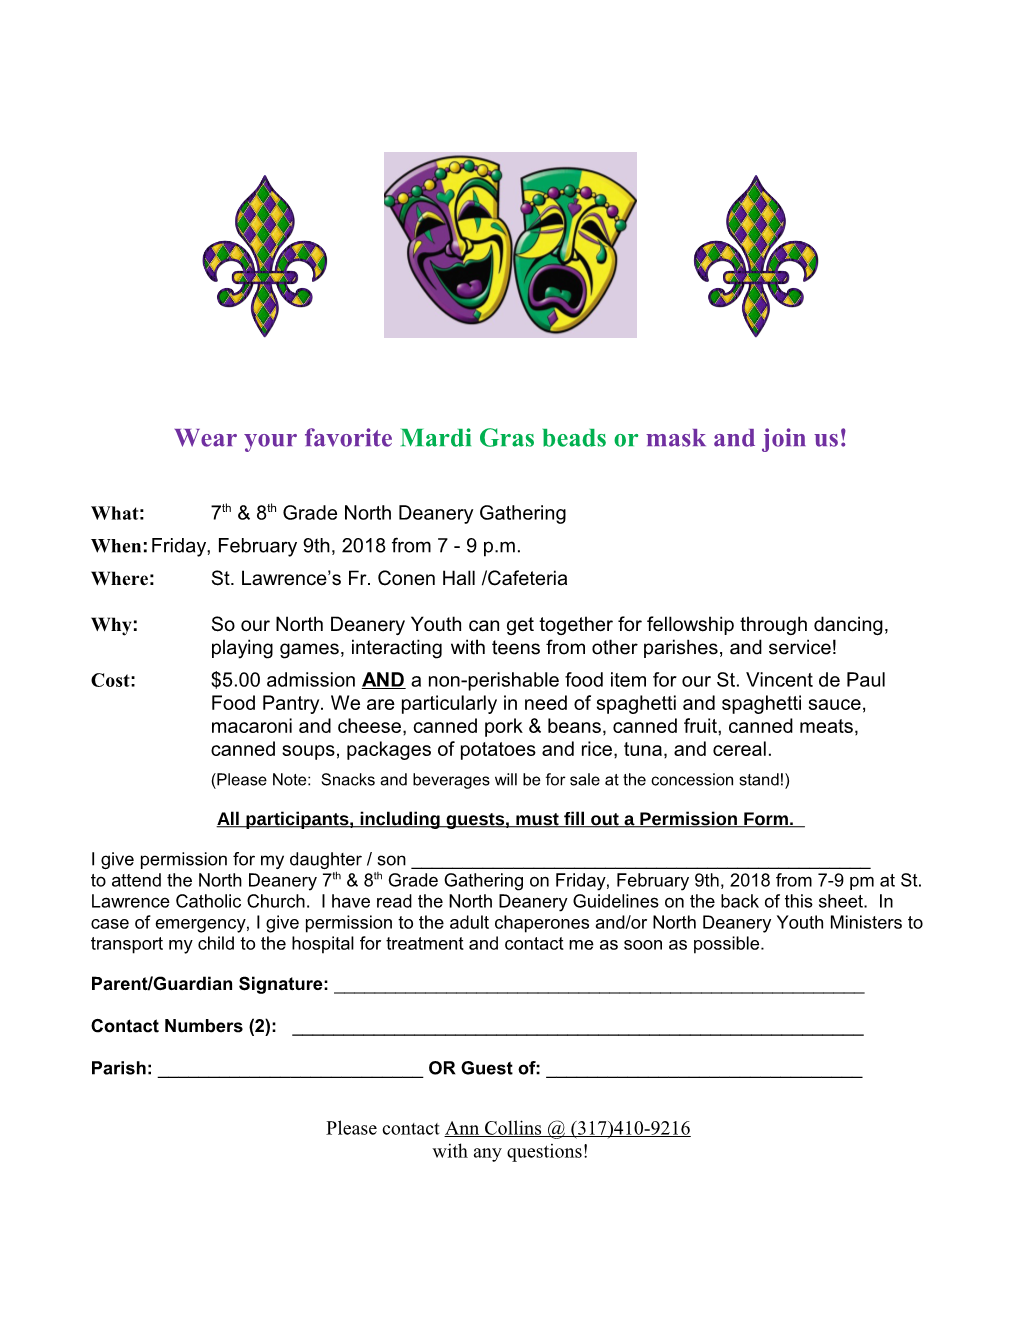 Wear Your Favorite Mardi Gras Beads Or Mask and Join Us!